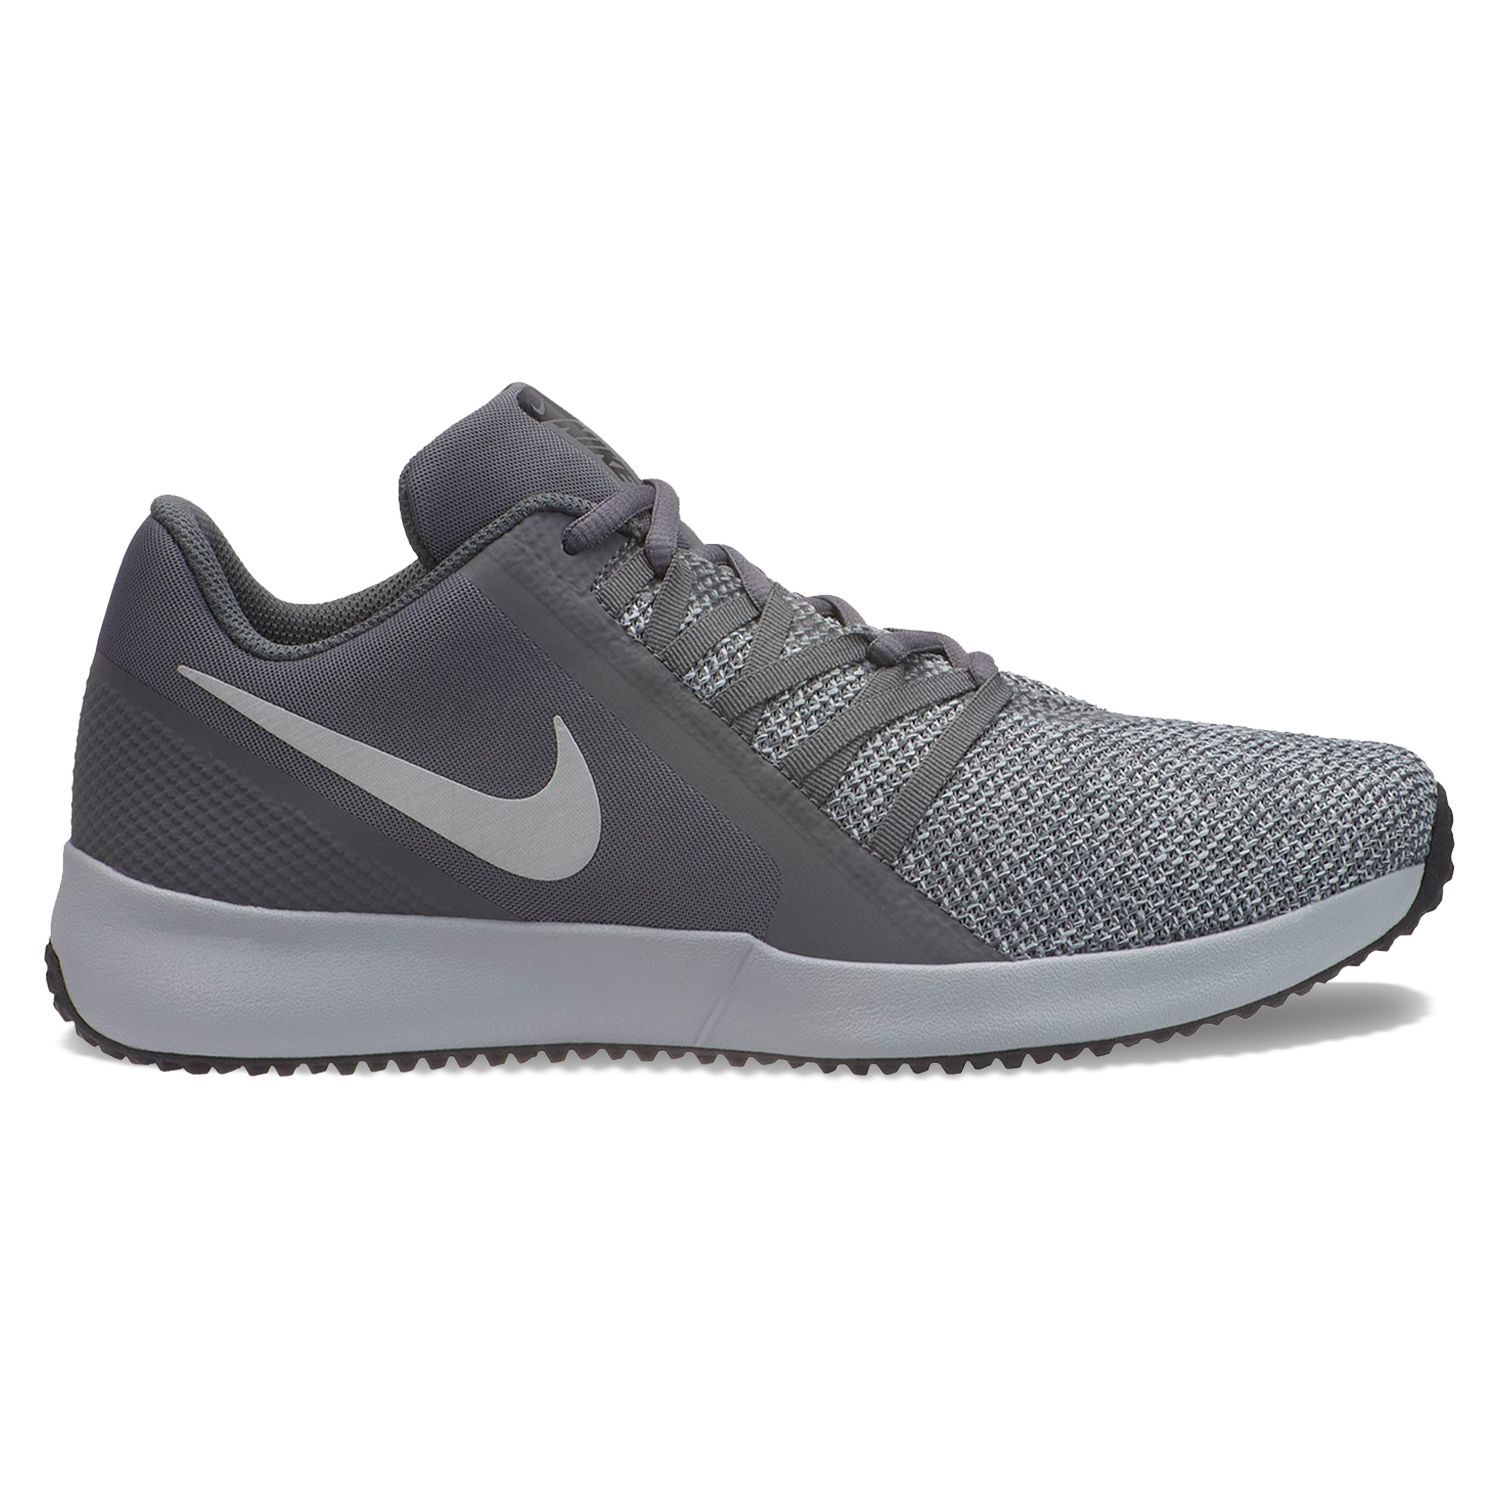 nike varsity compete trainer men's training shoes